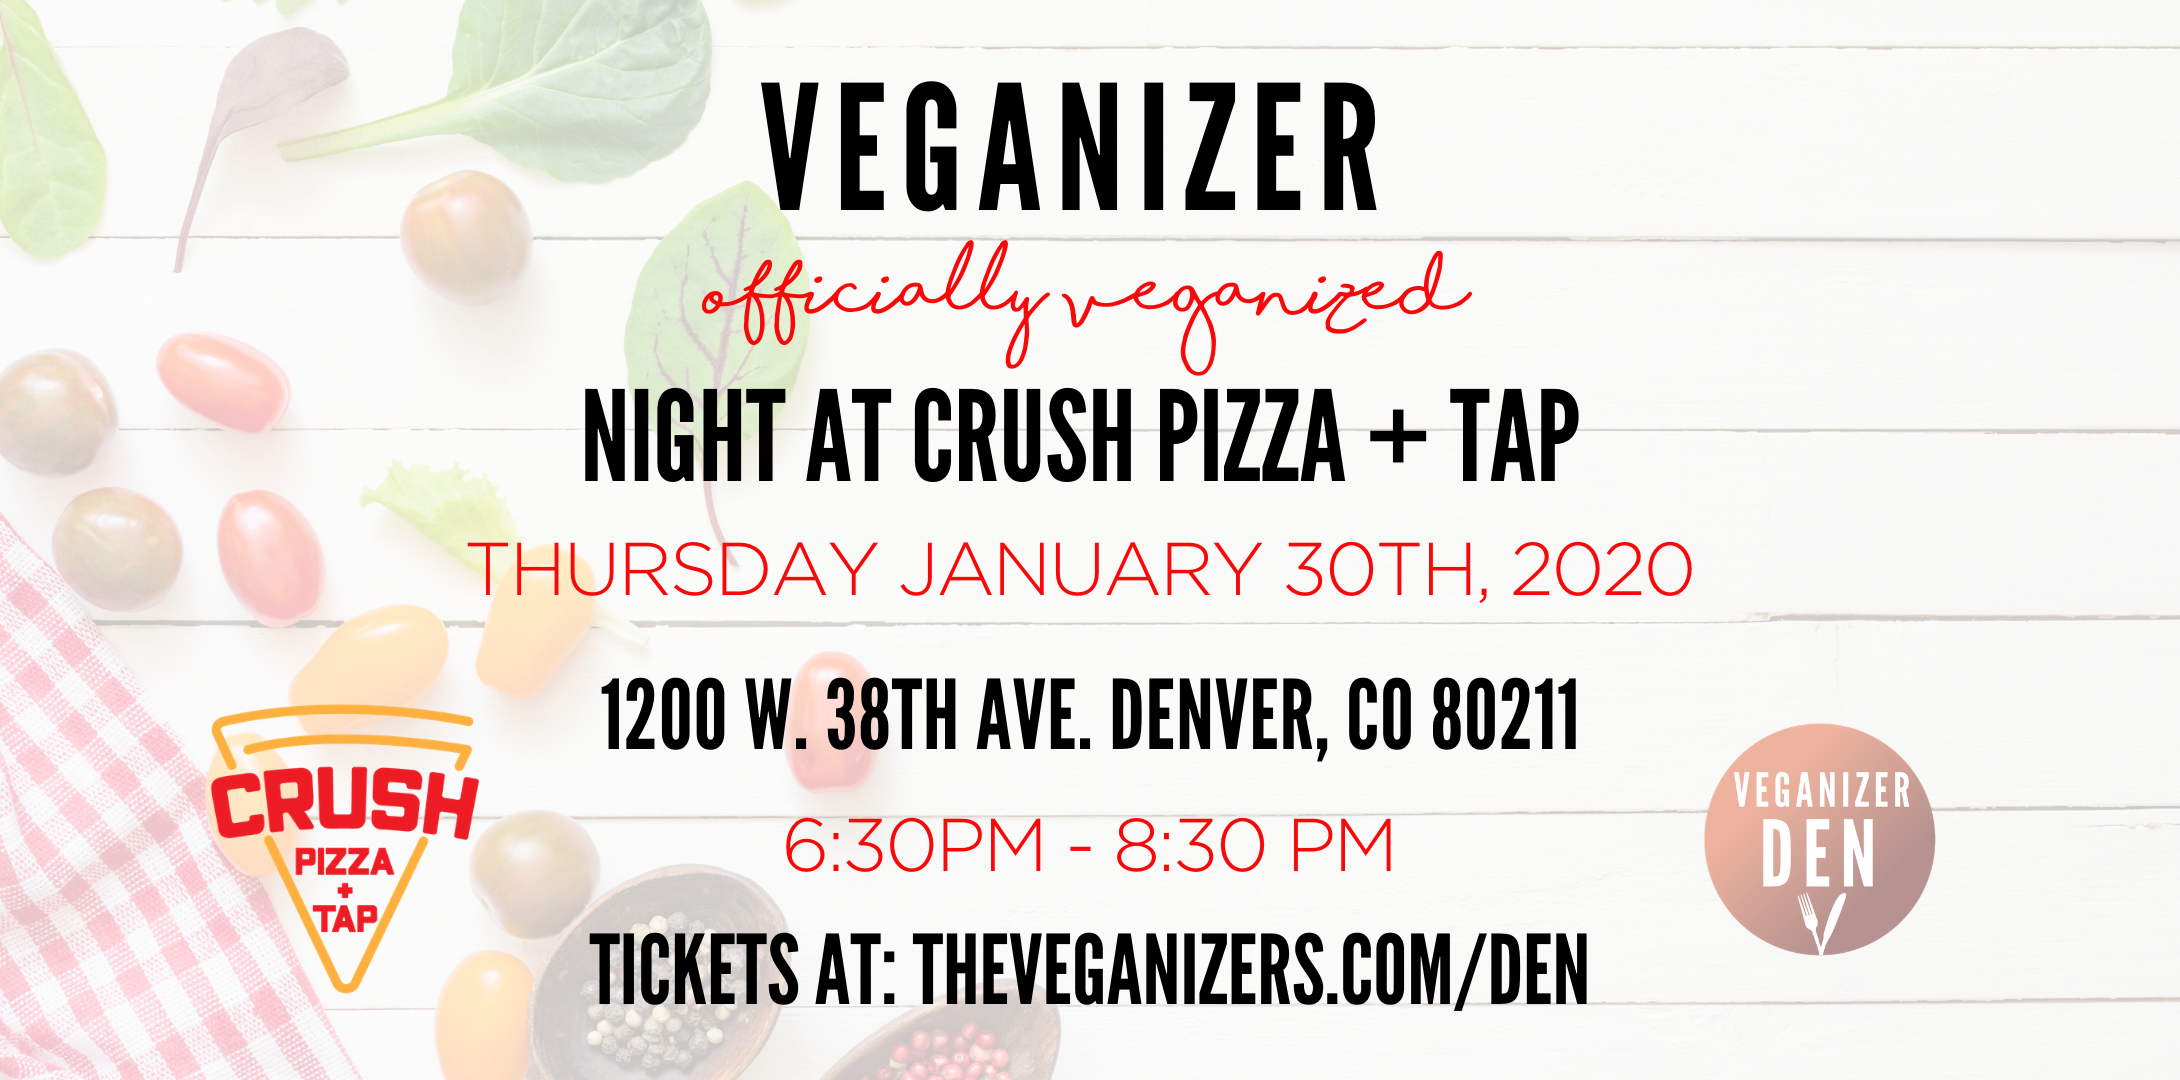 Officially Veganized Night at Crush Pizza + Tap